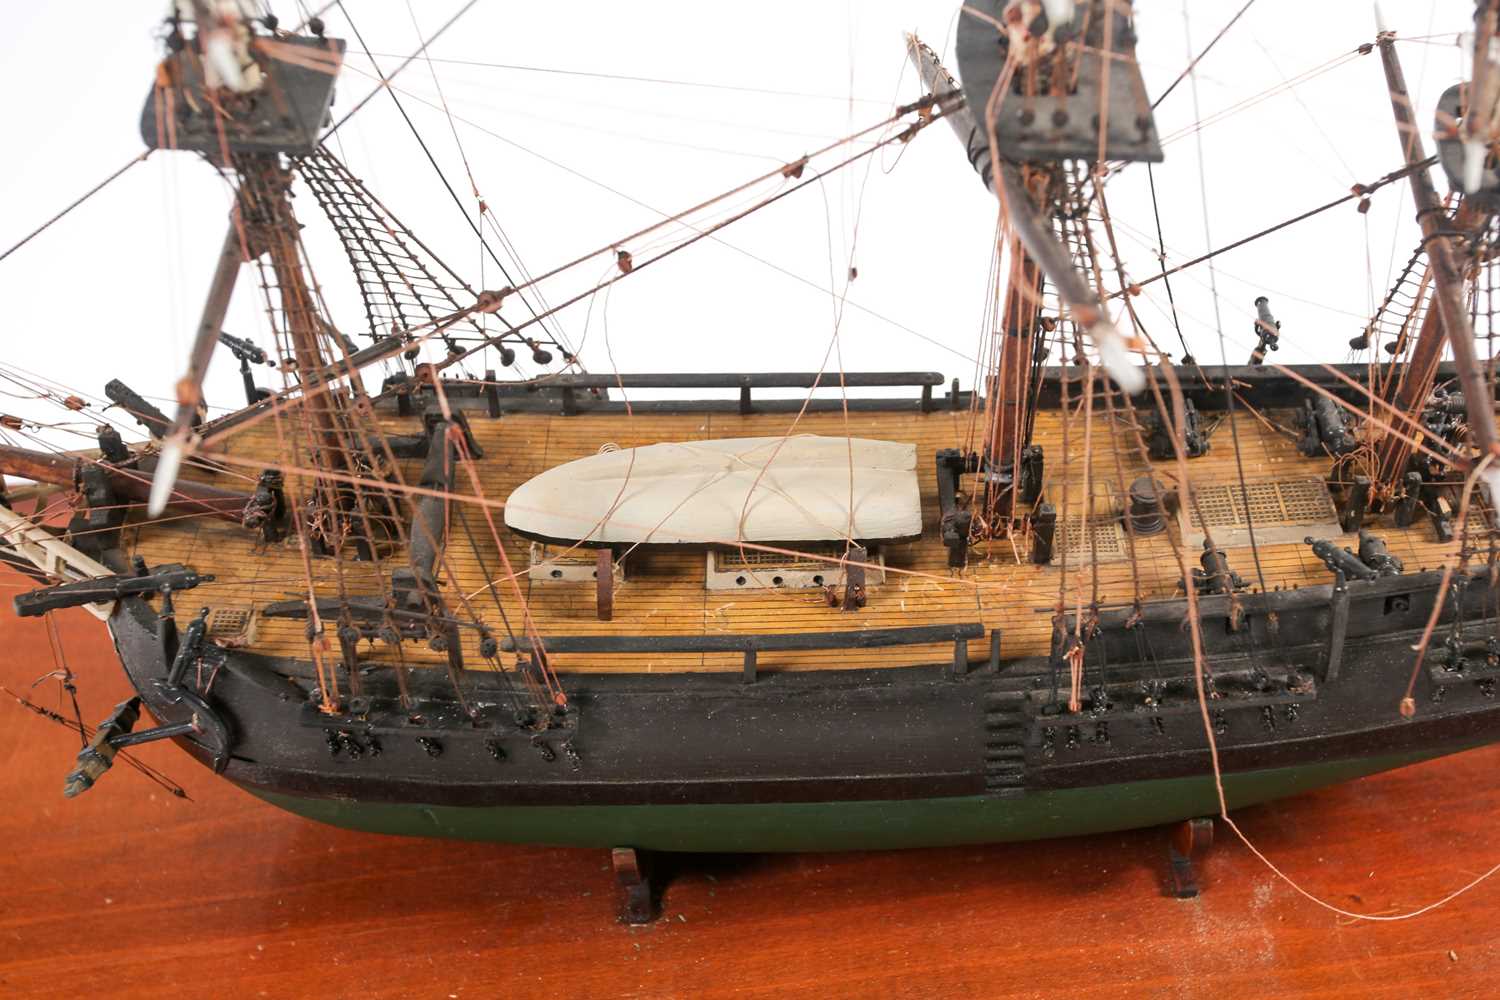 A scale model of the full-rigged HM Bounty with painted detail. Housed in a glazed display case. - Image 4 of 7